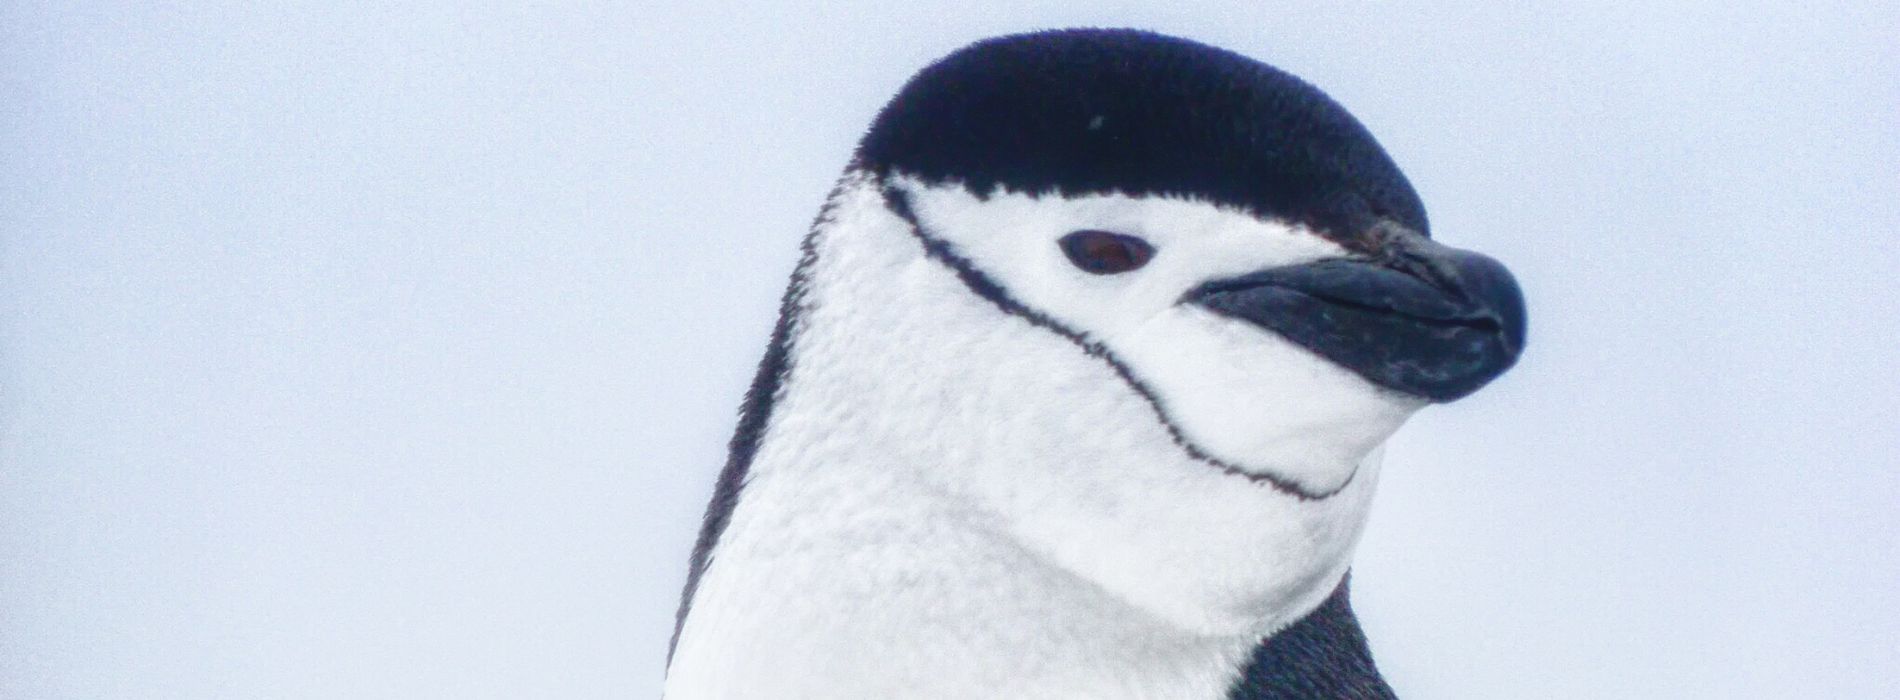 Chinstrap Penguin Biography: The Playful Life of the Smallest Antarctic Penguins